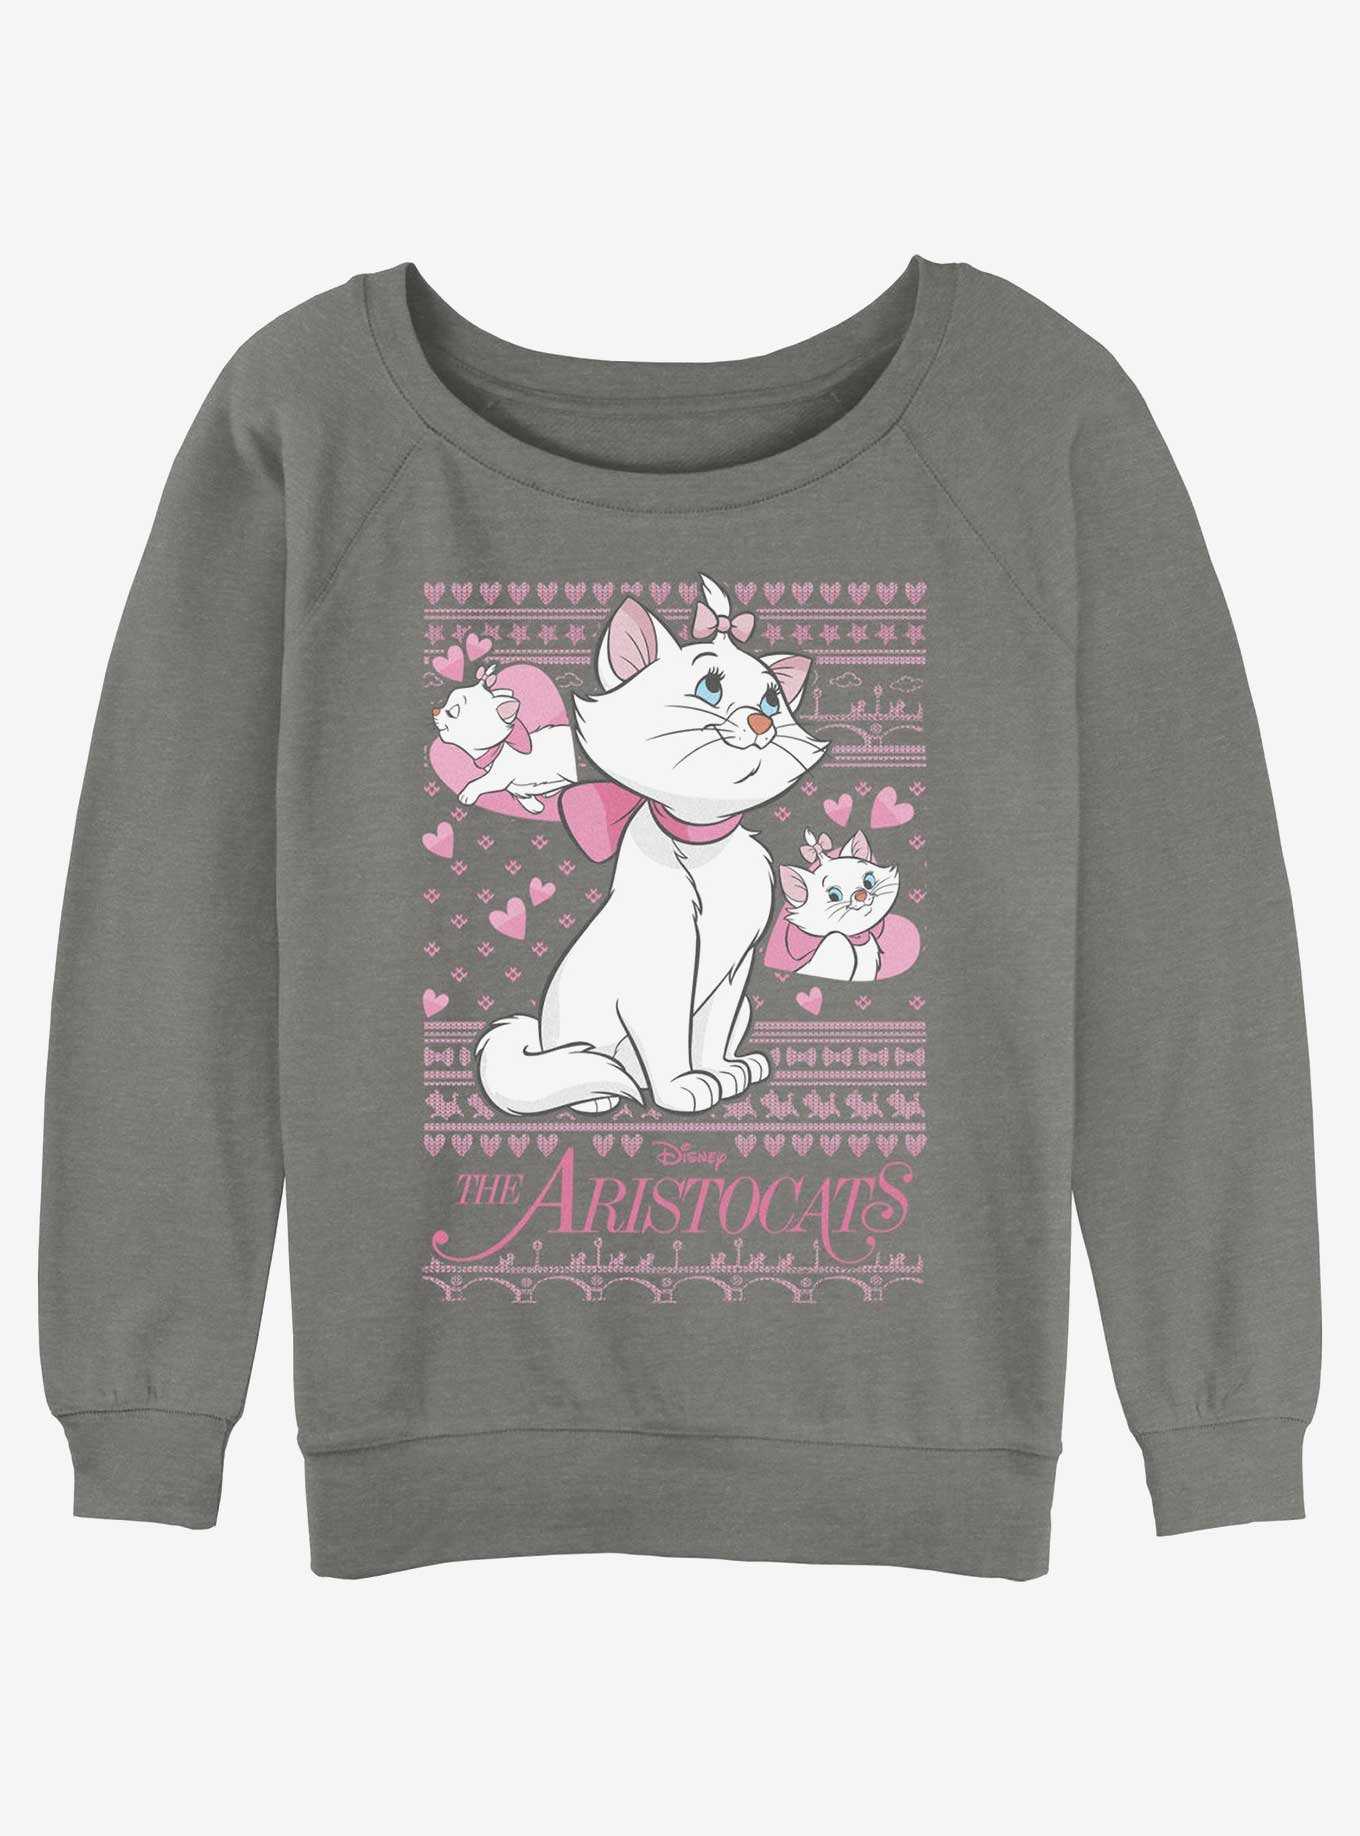 OFFICIAL The Aristocats Shirts, Gifts Merchandise & Boxlunch 